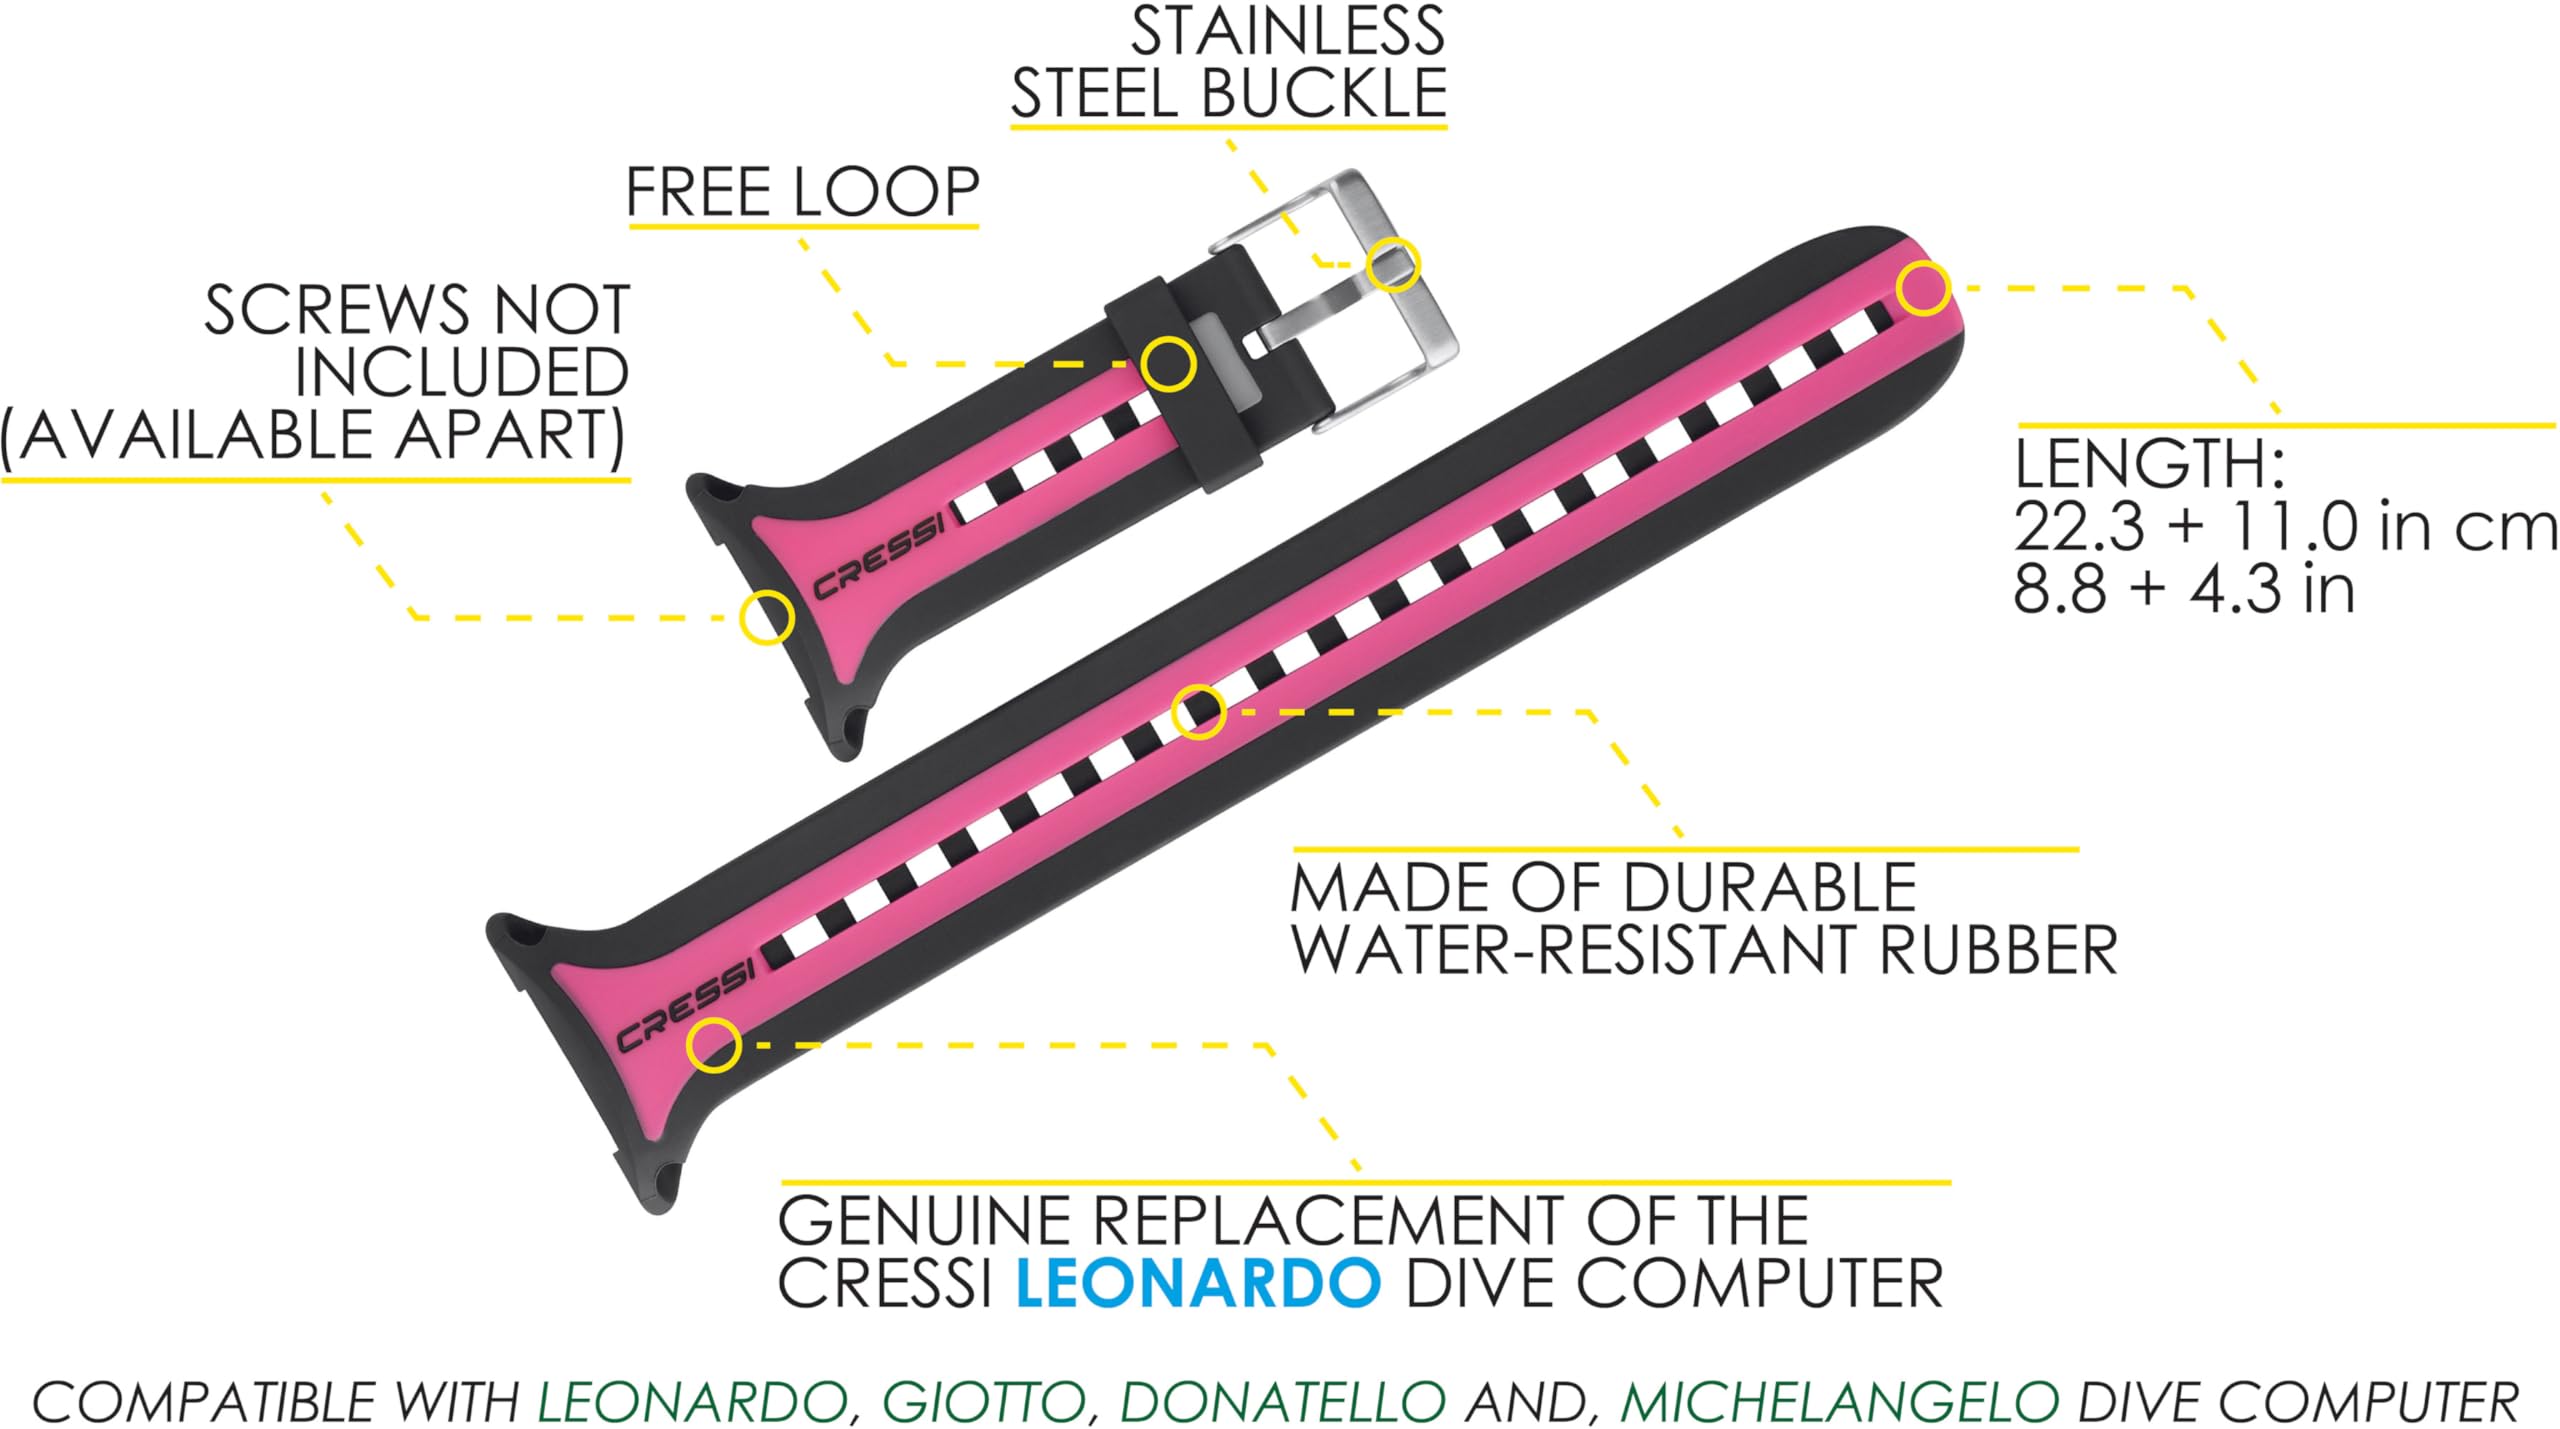 Cressi Genuine Watchband, Battery, Screen Protector Replacement for Leonardo and Giotto Dive Computer - Official Spare Parts